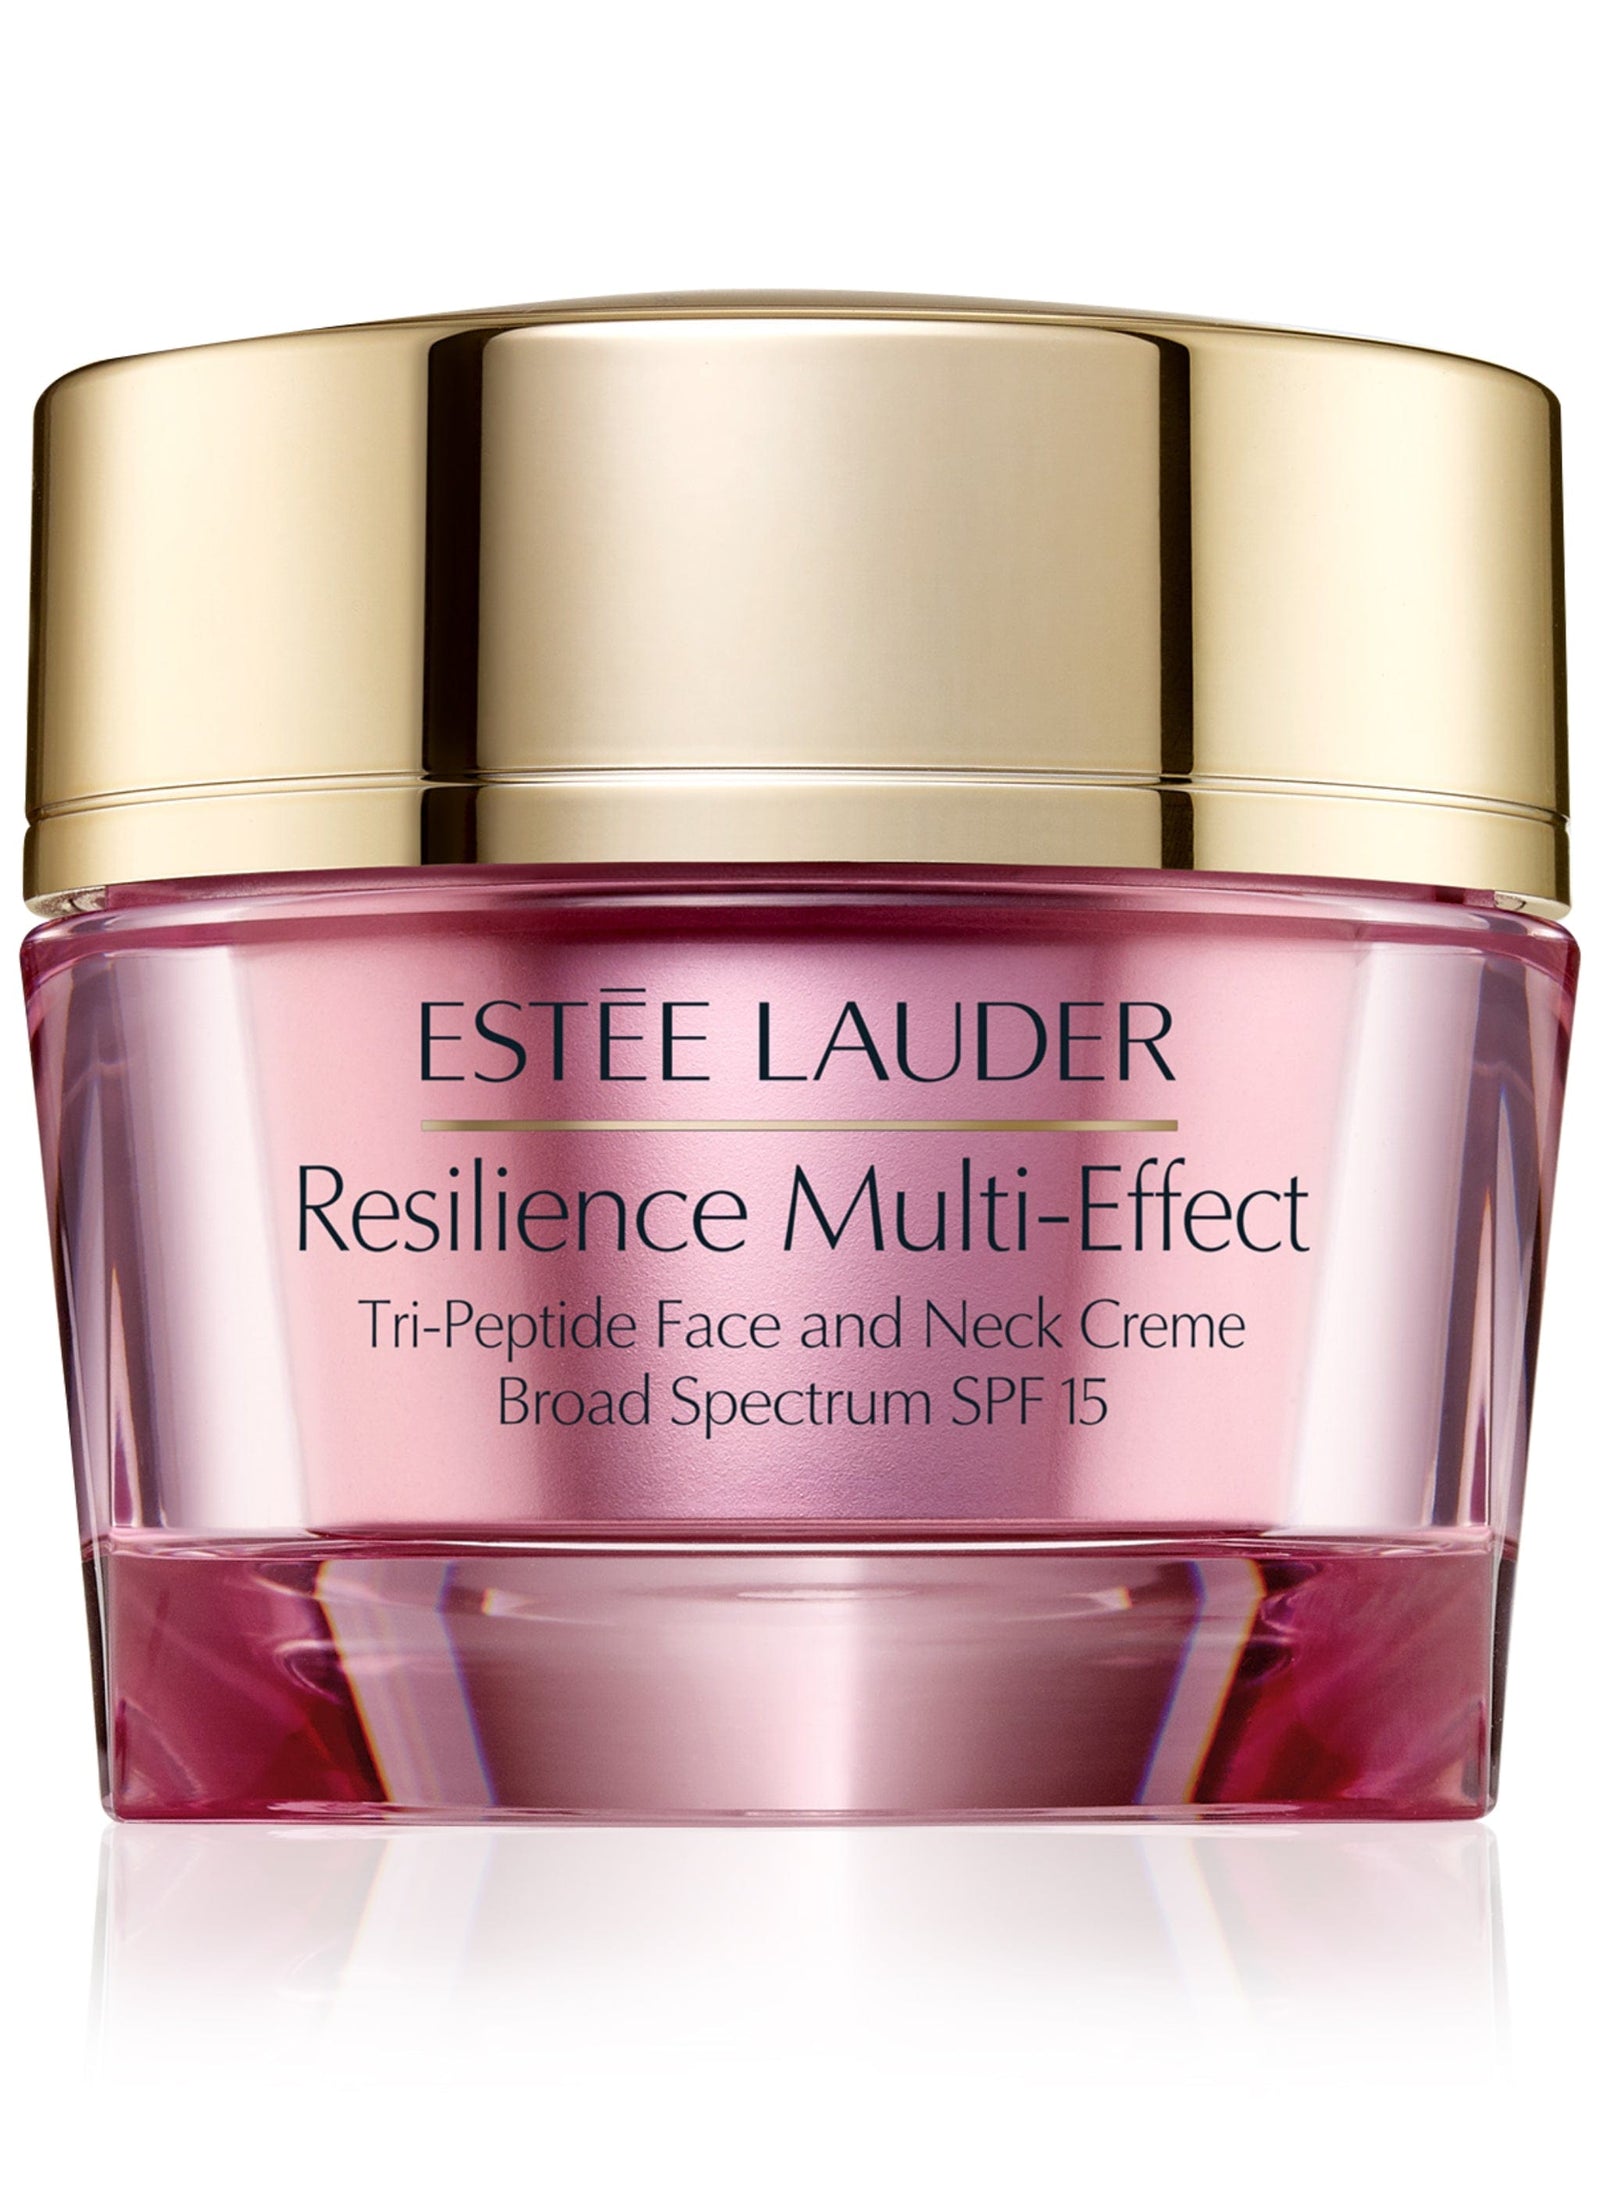 Estée Lauder Resilience Lift Multi-Effect Tri-Peptide Face And Neck Creme SPF15 For Dry Skin